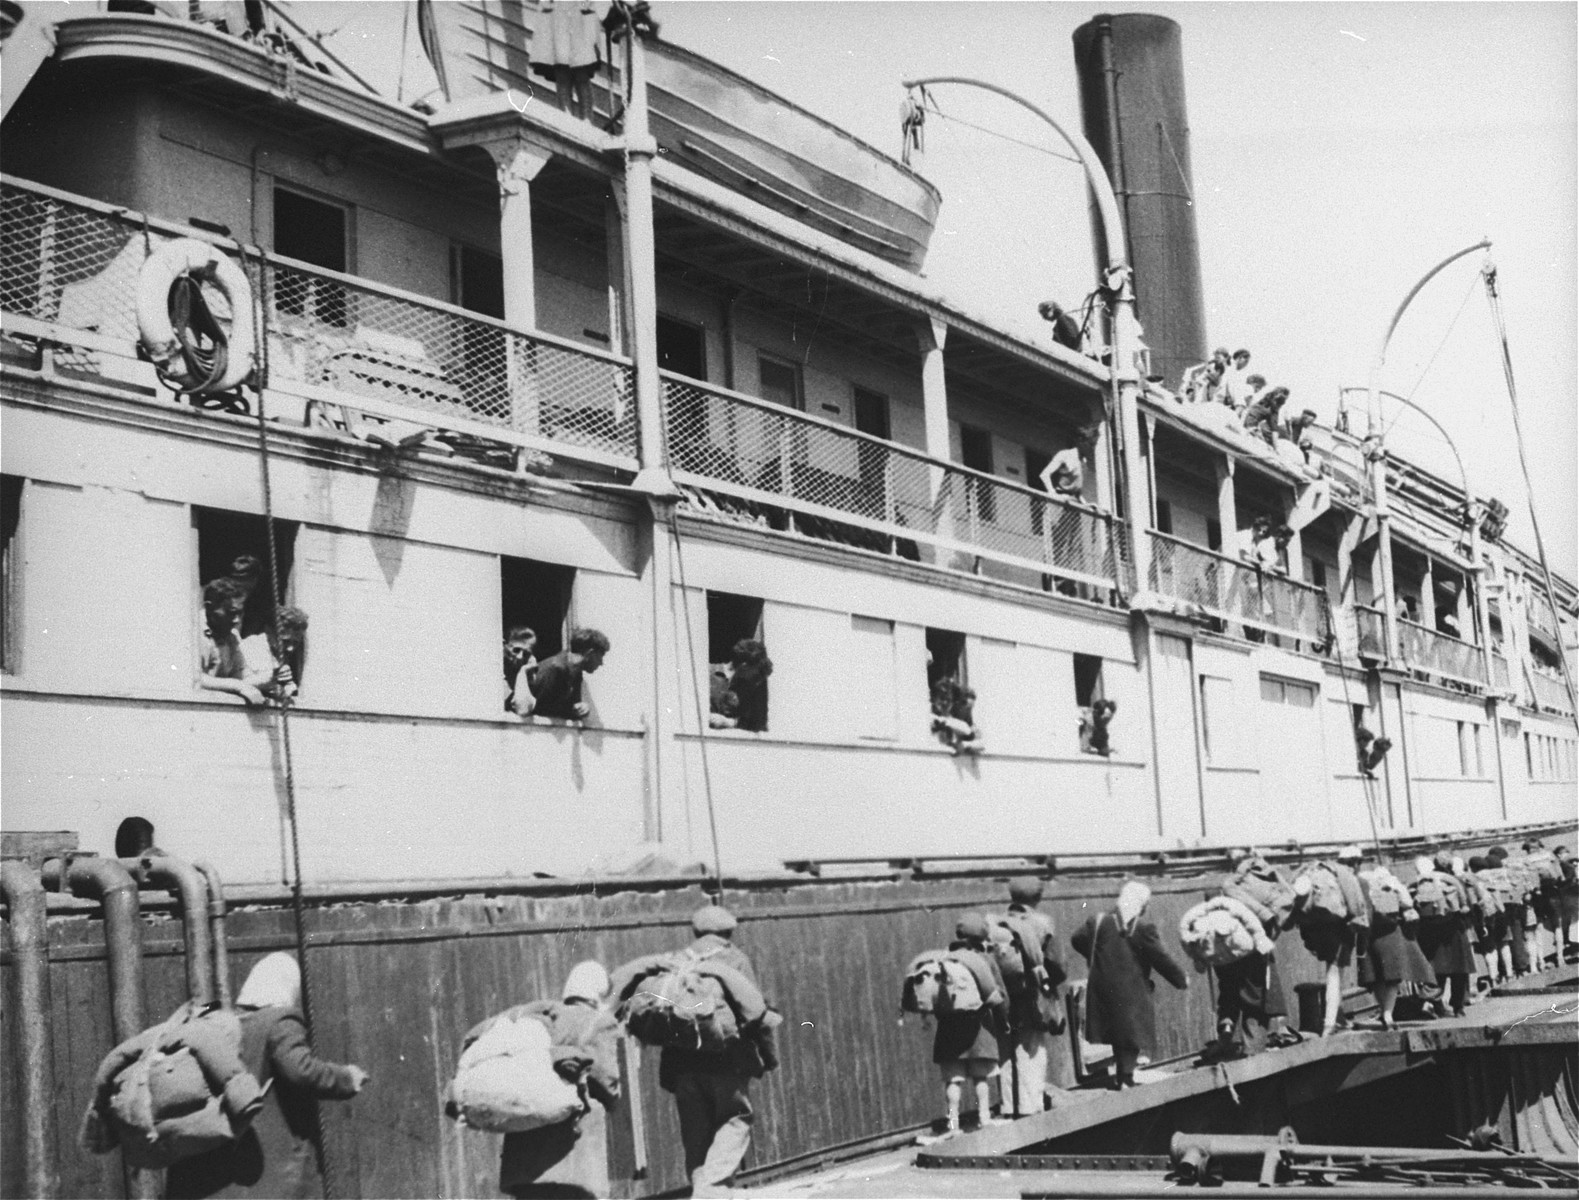 Exodus 1947 refugees board the President Warfield, docked at a quay in Sete's harbor, from a neighboring boat.